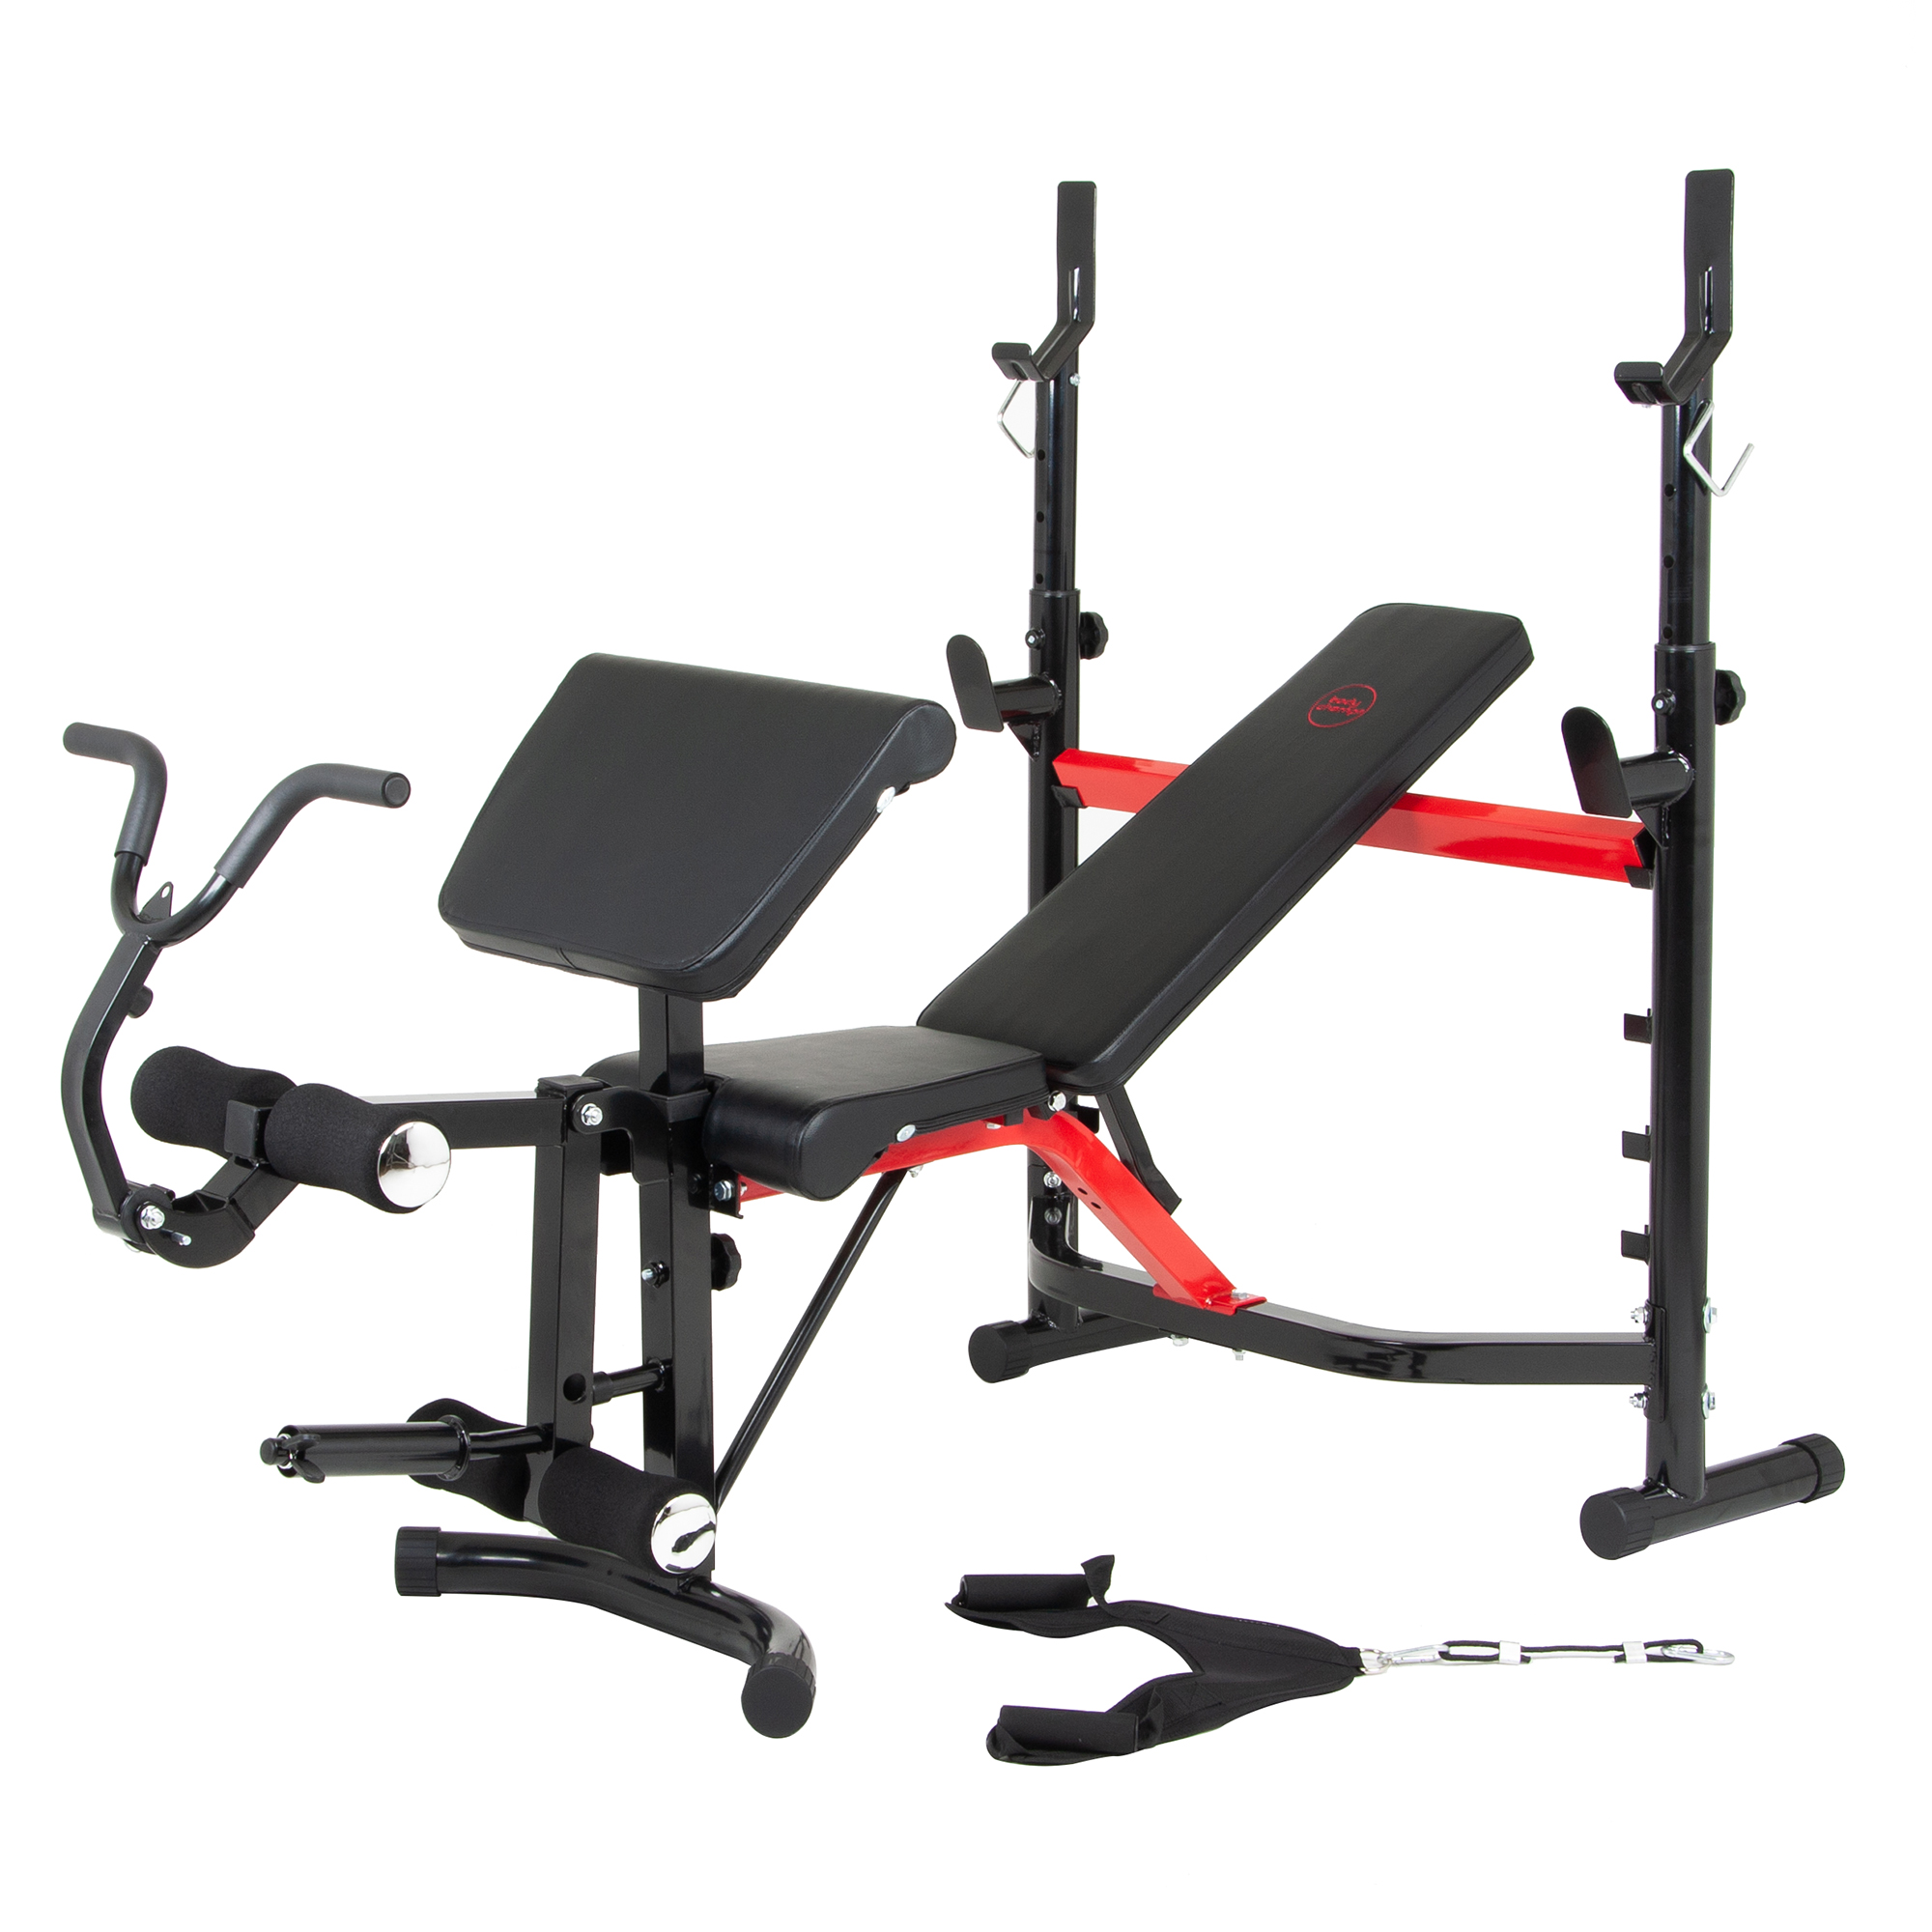 Body Champ BCB5268 Olympic Weight Bench with Arm Curl and Curl Bar Attachment, 300 Lbs. Weight Limit - image 1 of 10